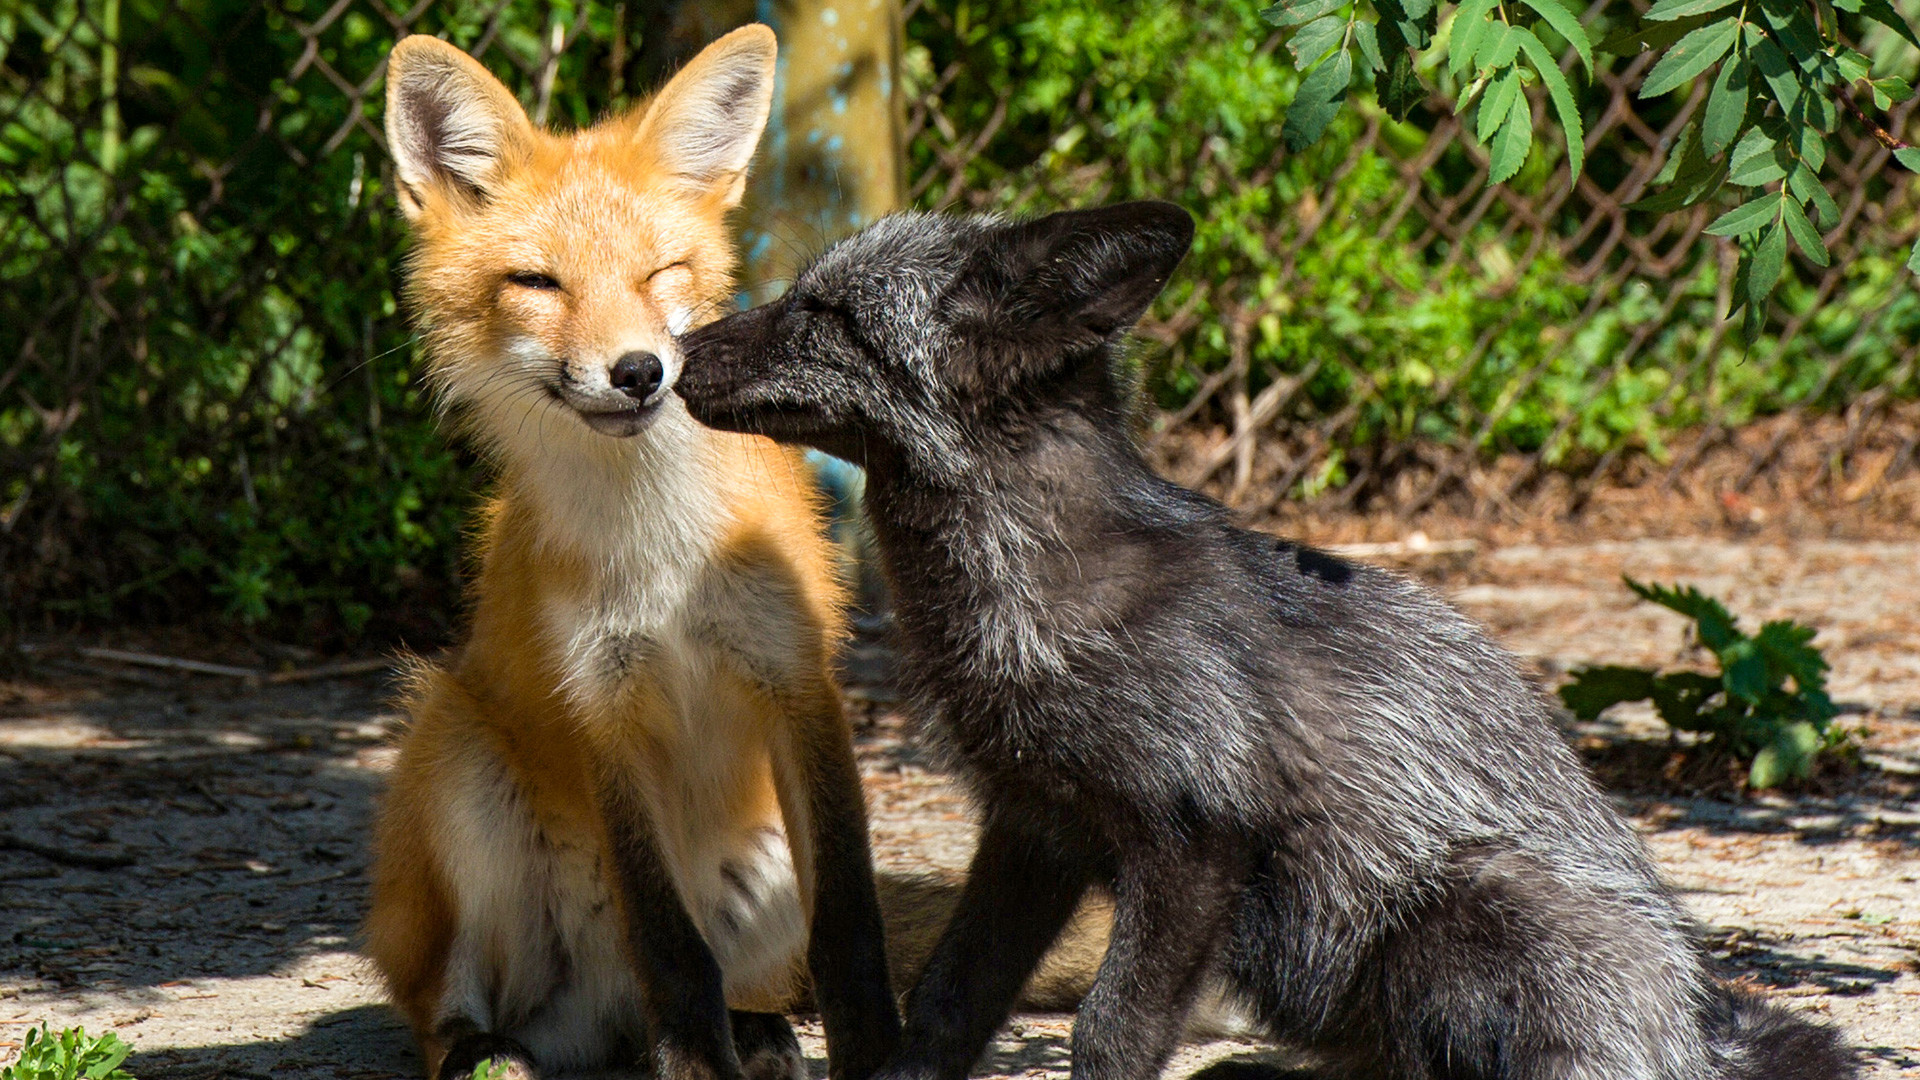 Tame foxes are seen here in the enclosure on the experimental farm of the Institute for Cytology and Genetics of the Russian Academy of Sciences Siberian Branch. 